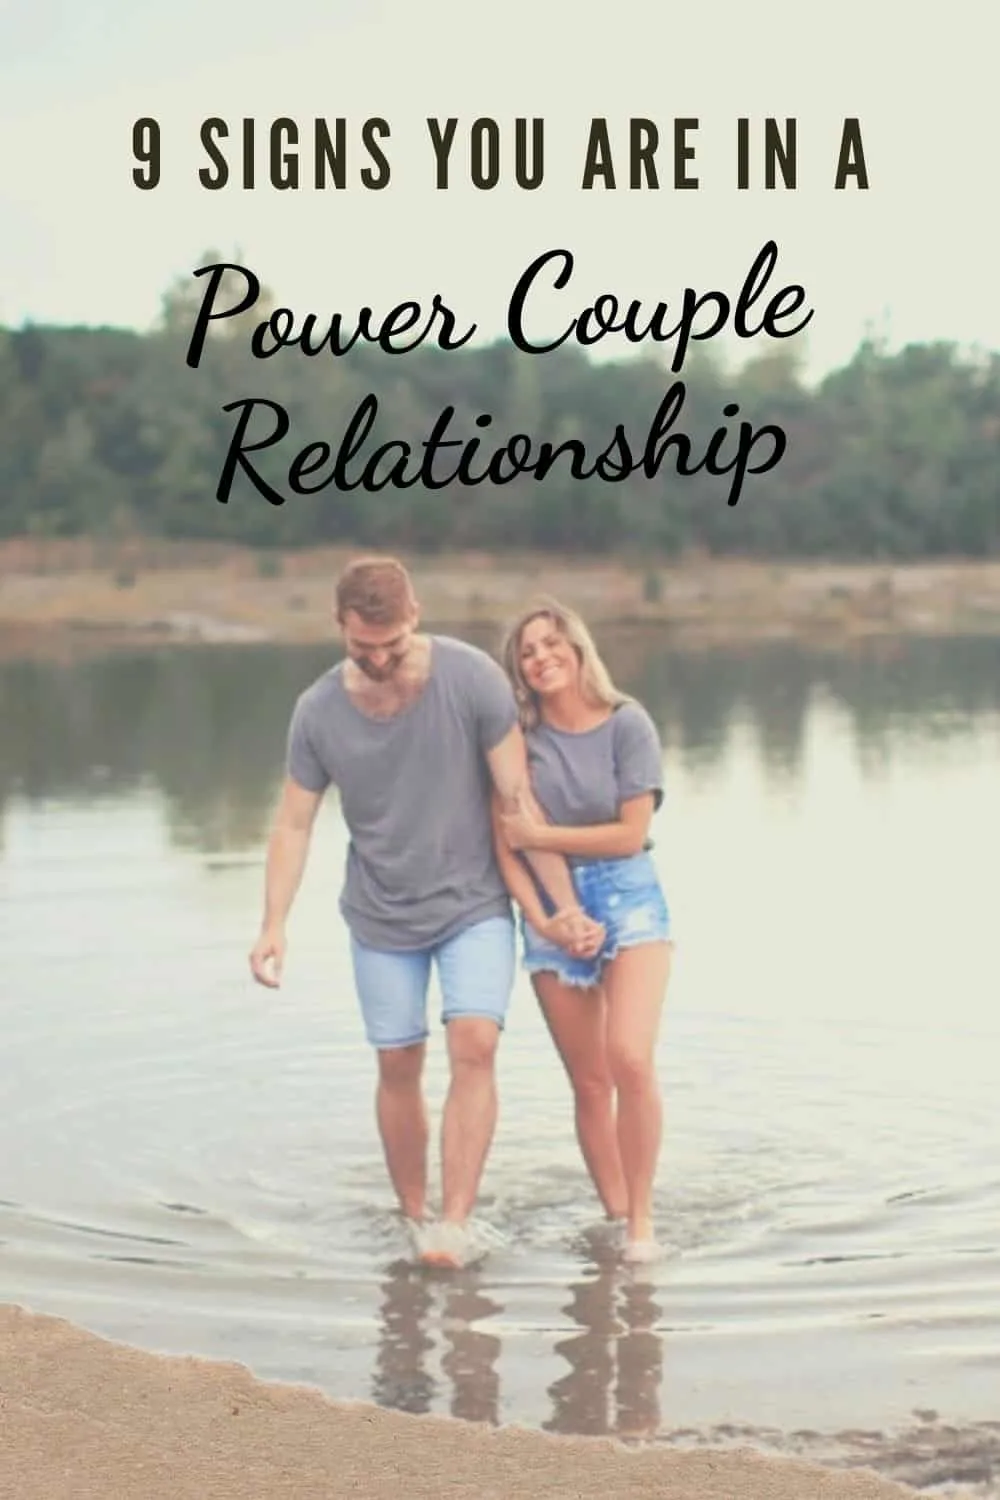 9 Signs You Are In A Power Couple Relationship